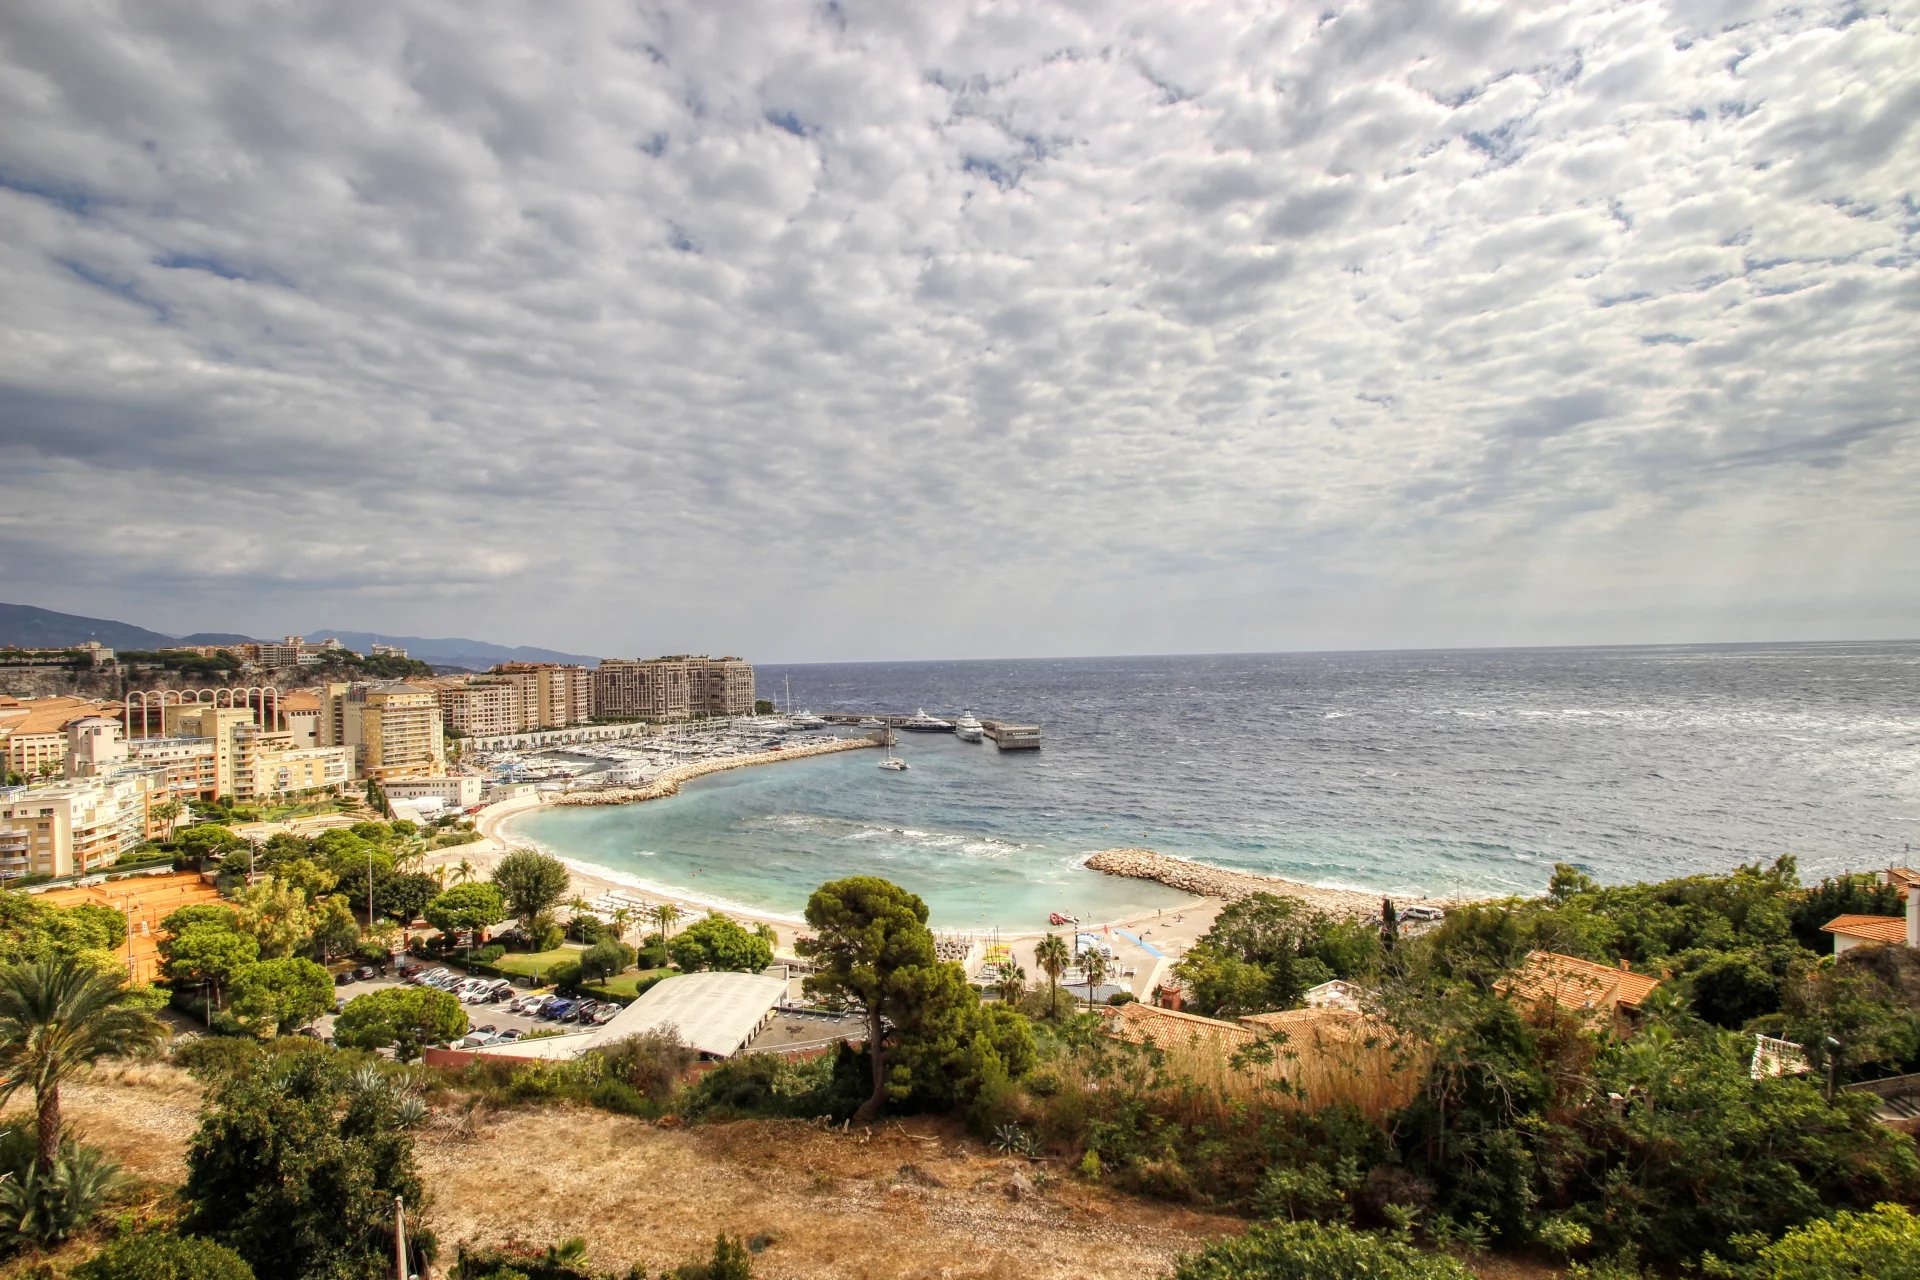 CAP D'AIL "NEARBY MONACO" - HOTEL PARTICULIER 4P 190M² | PANORAMIC SEA VIEW | TERRACES | GARAGE